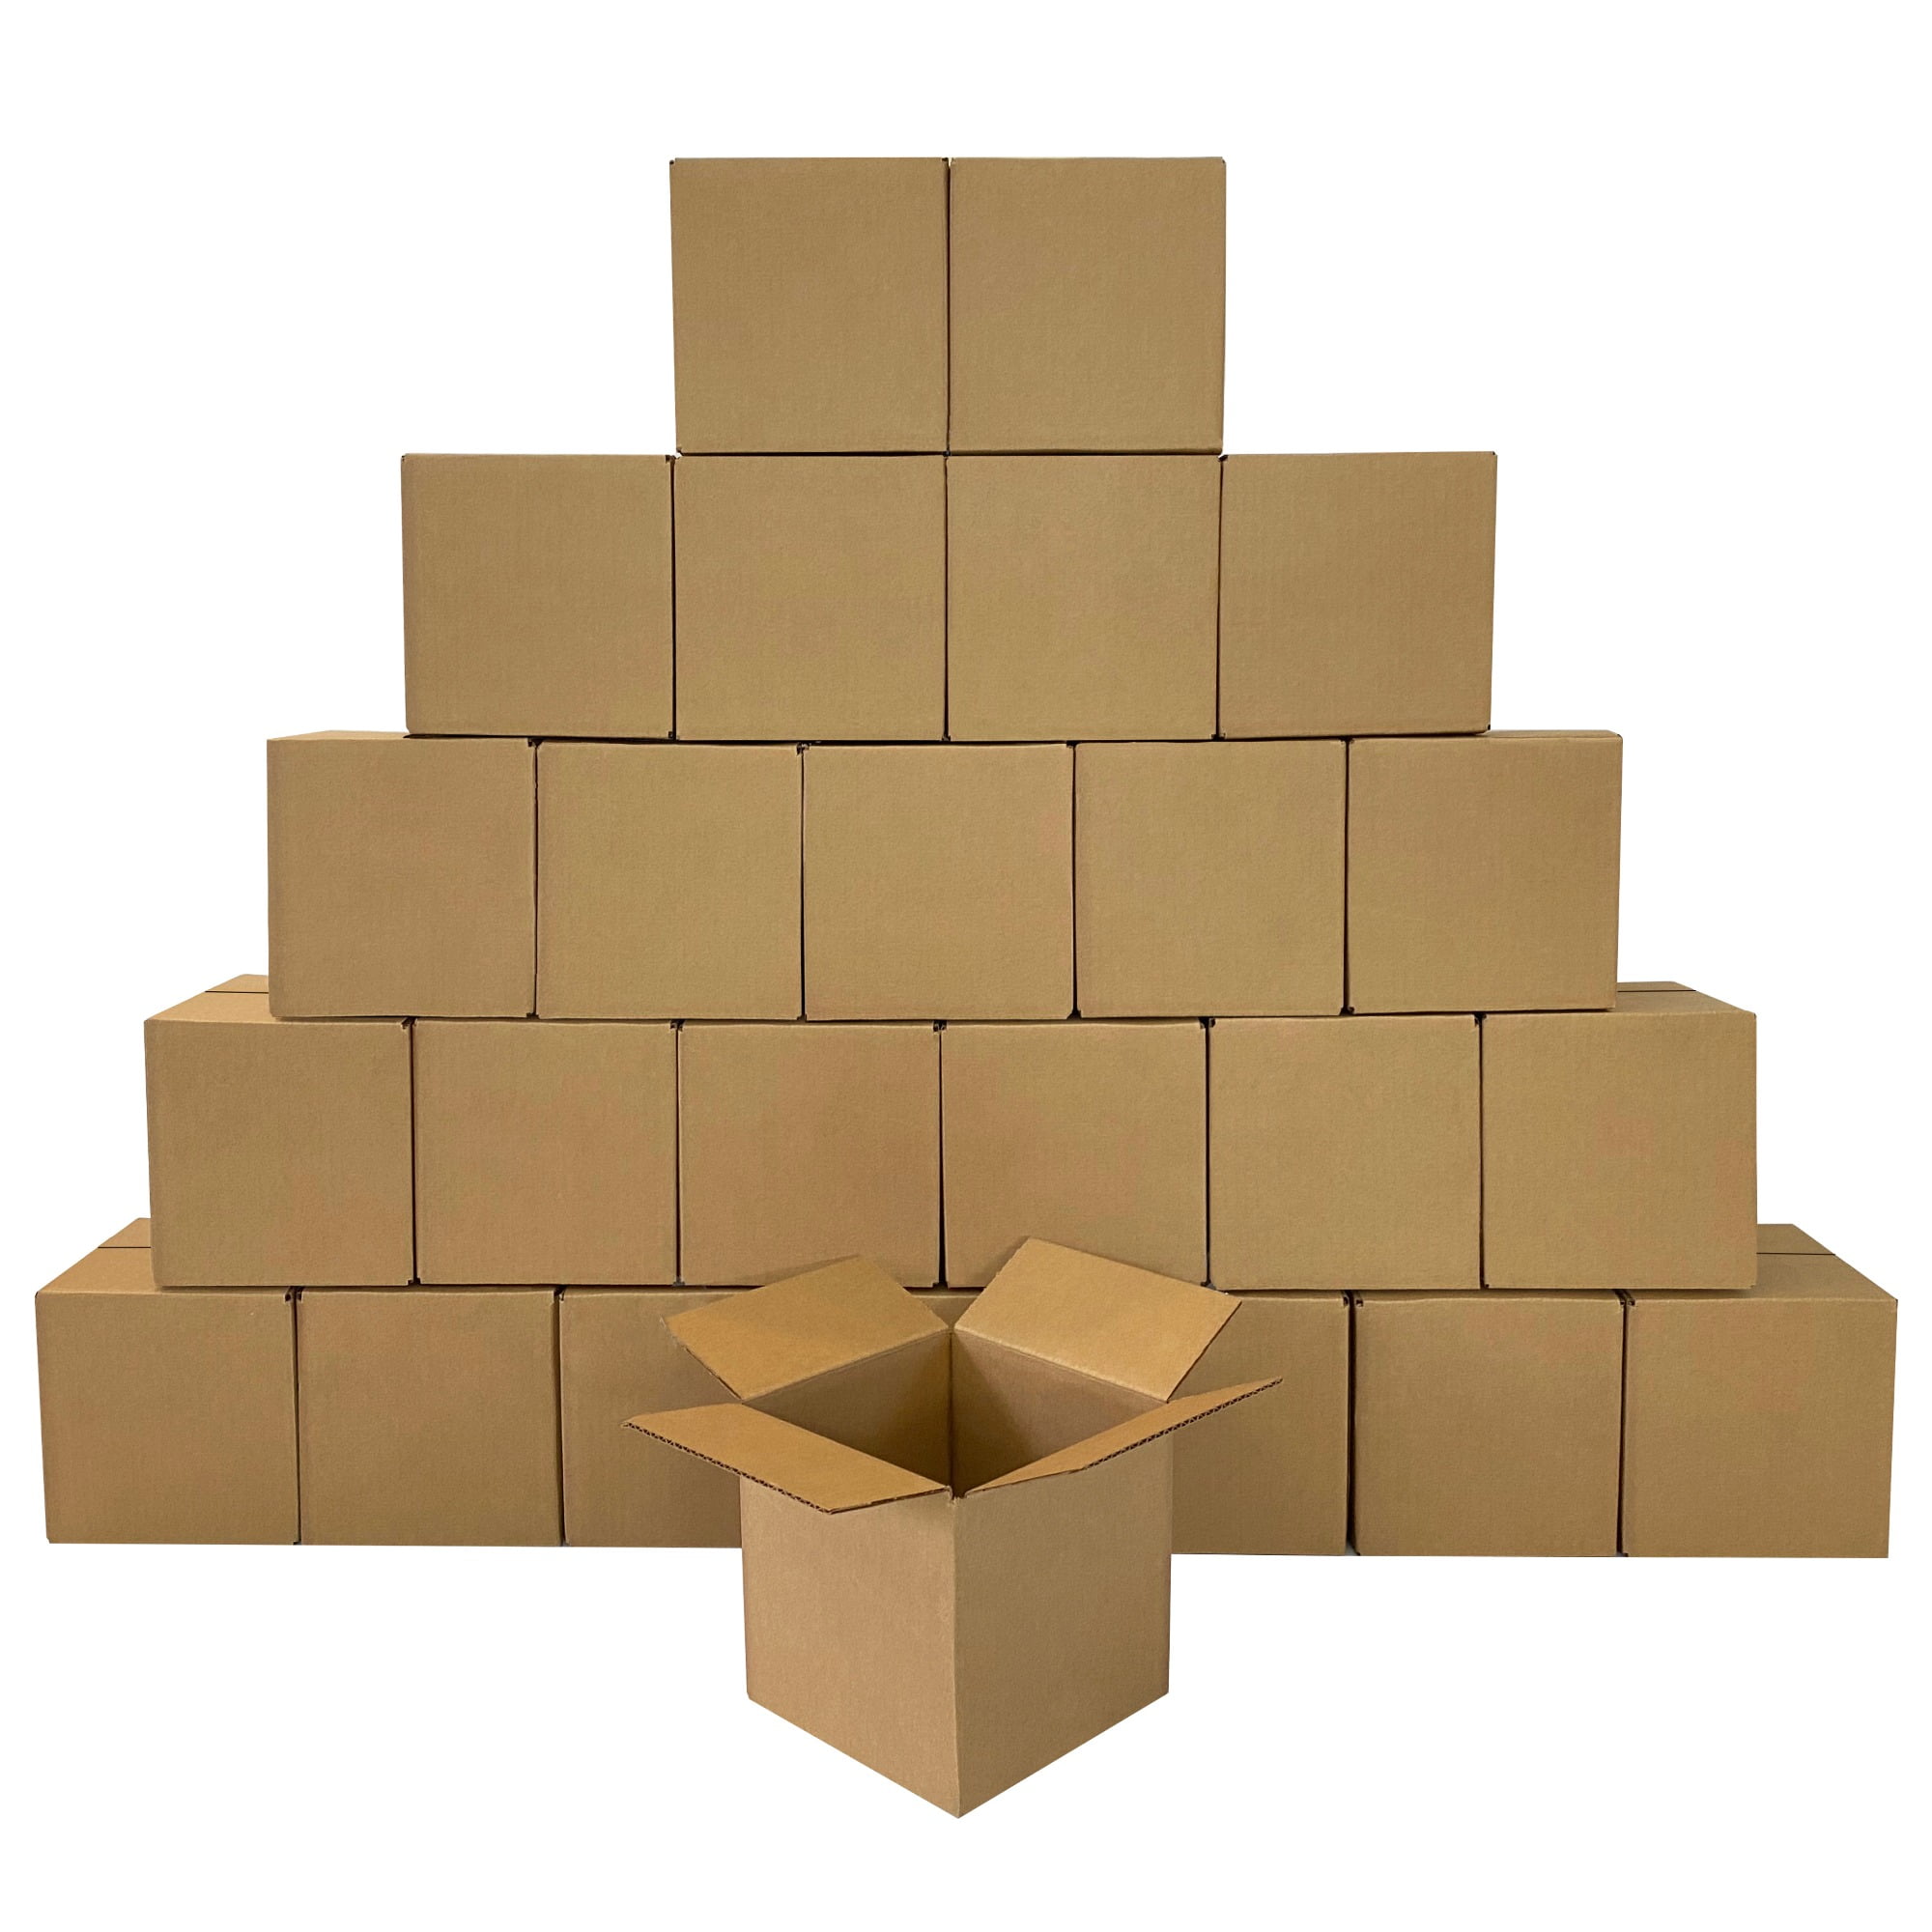 25 Small Cardboard Boxes Cubes Size 4x4x4" Singlewall Packaging Shipping Postal 